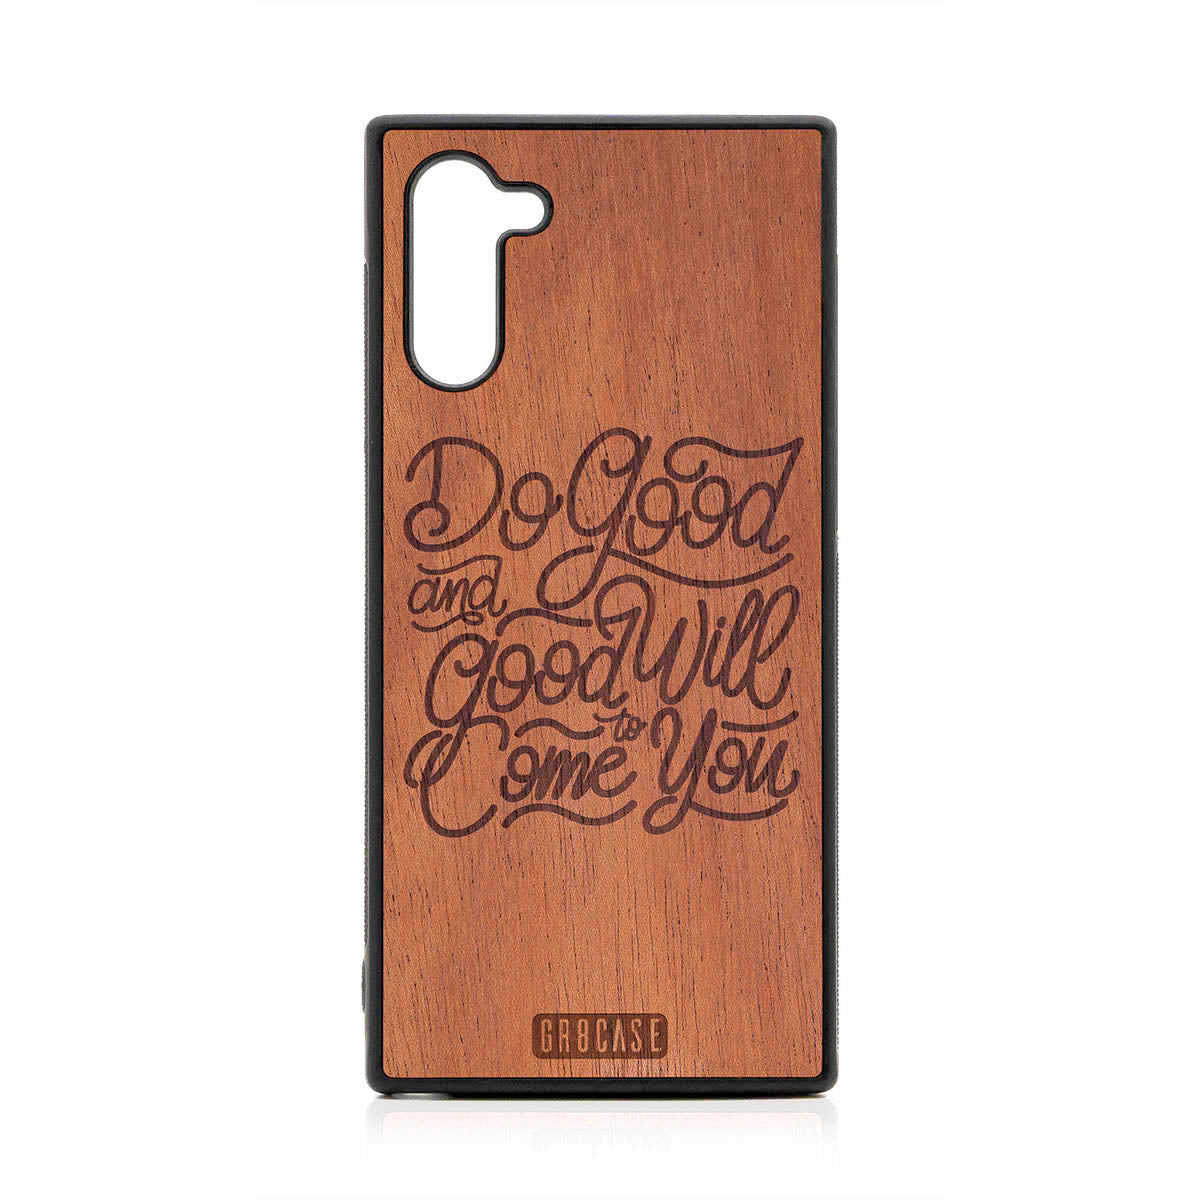 Do Good And Good Will Come To You Design Wood Case For Samsung Galaxy Note 10 by GR8CASE